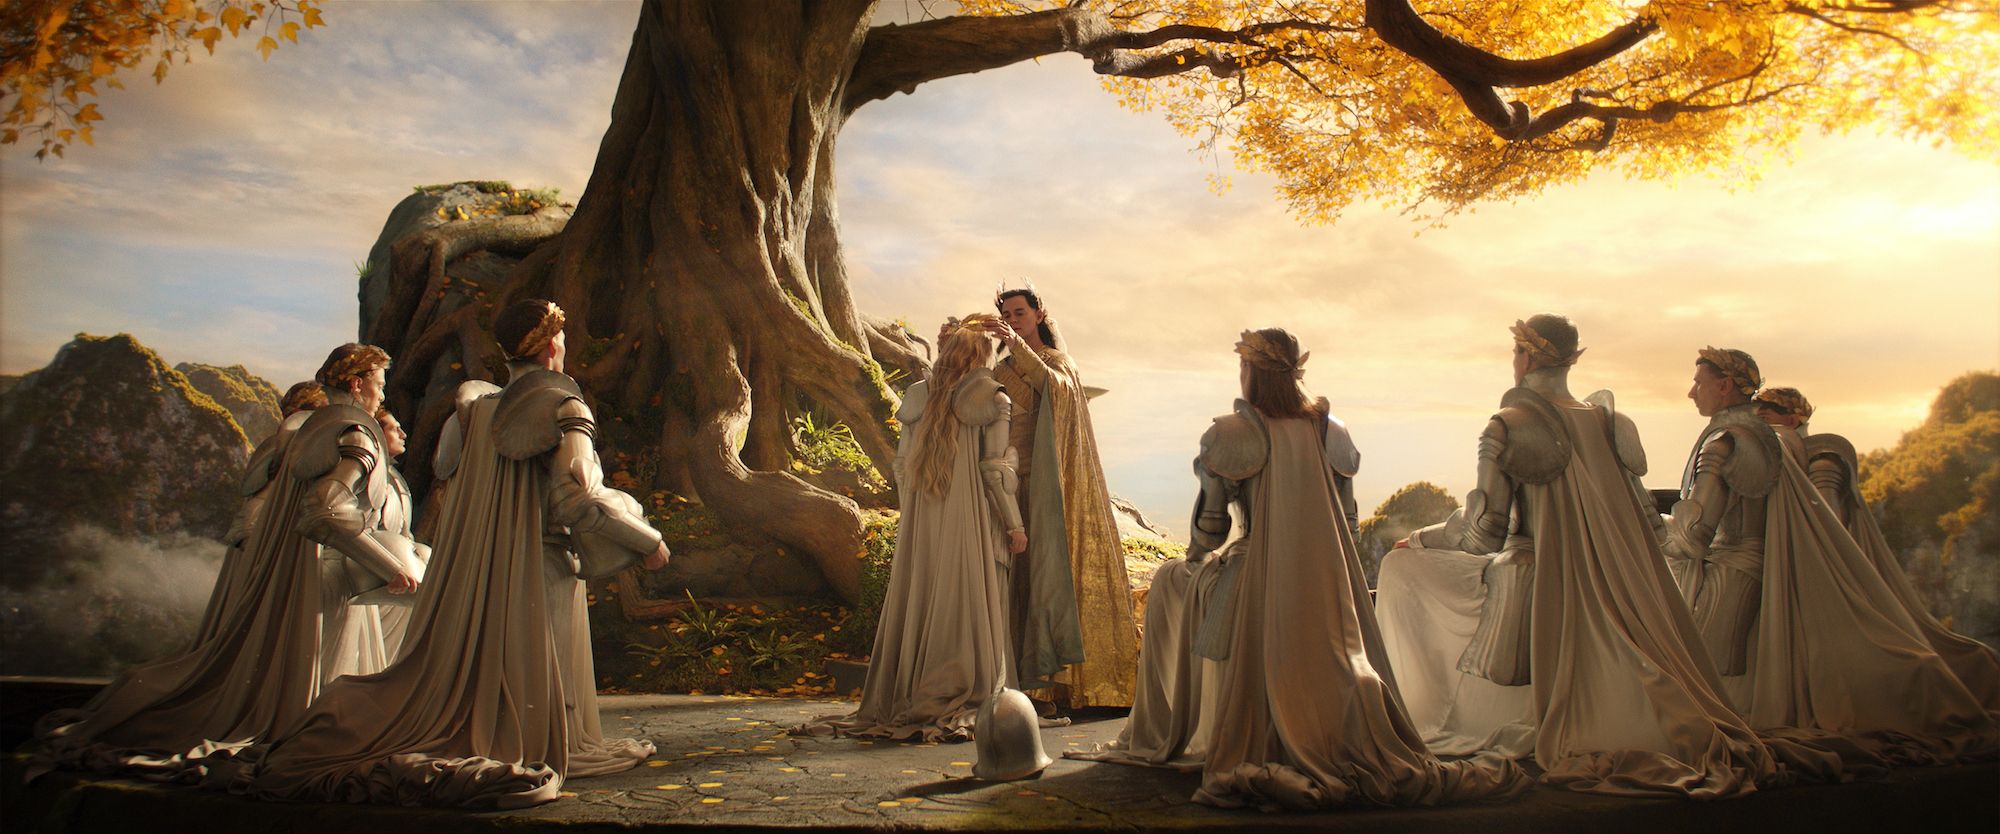 Everything We Know About 's The Lord of the Rings: The Rings of Power